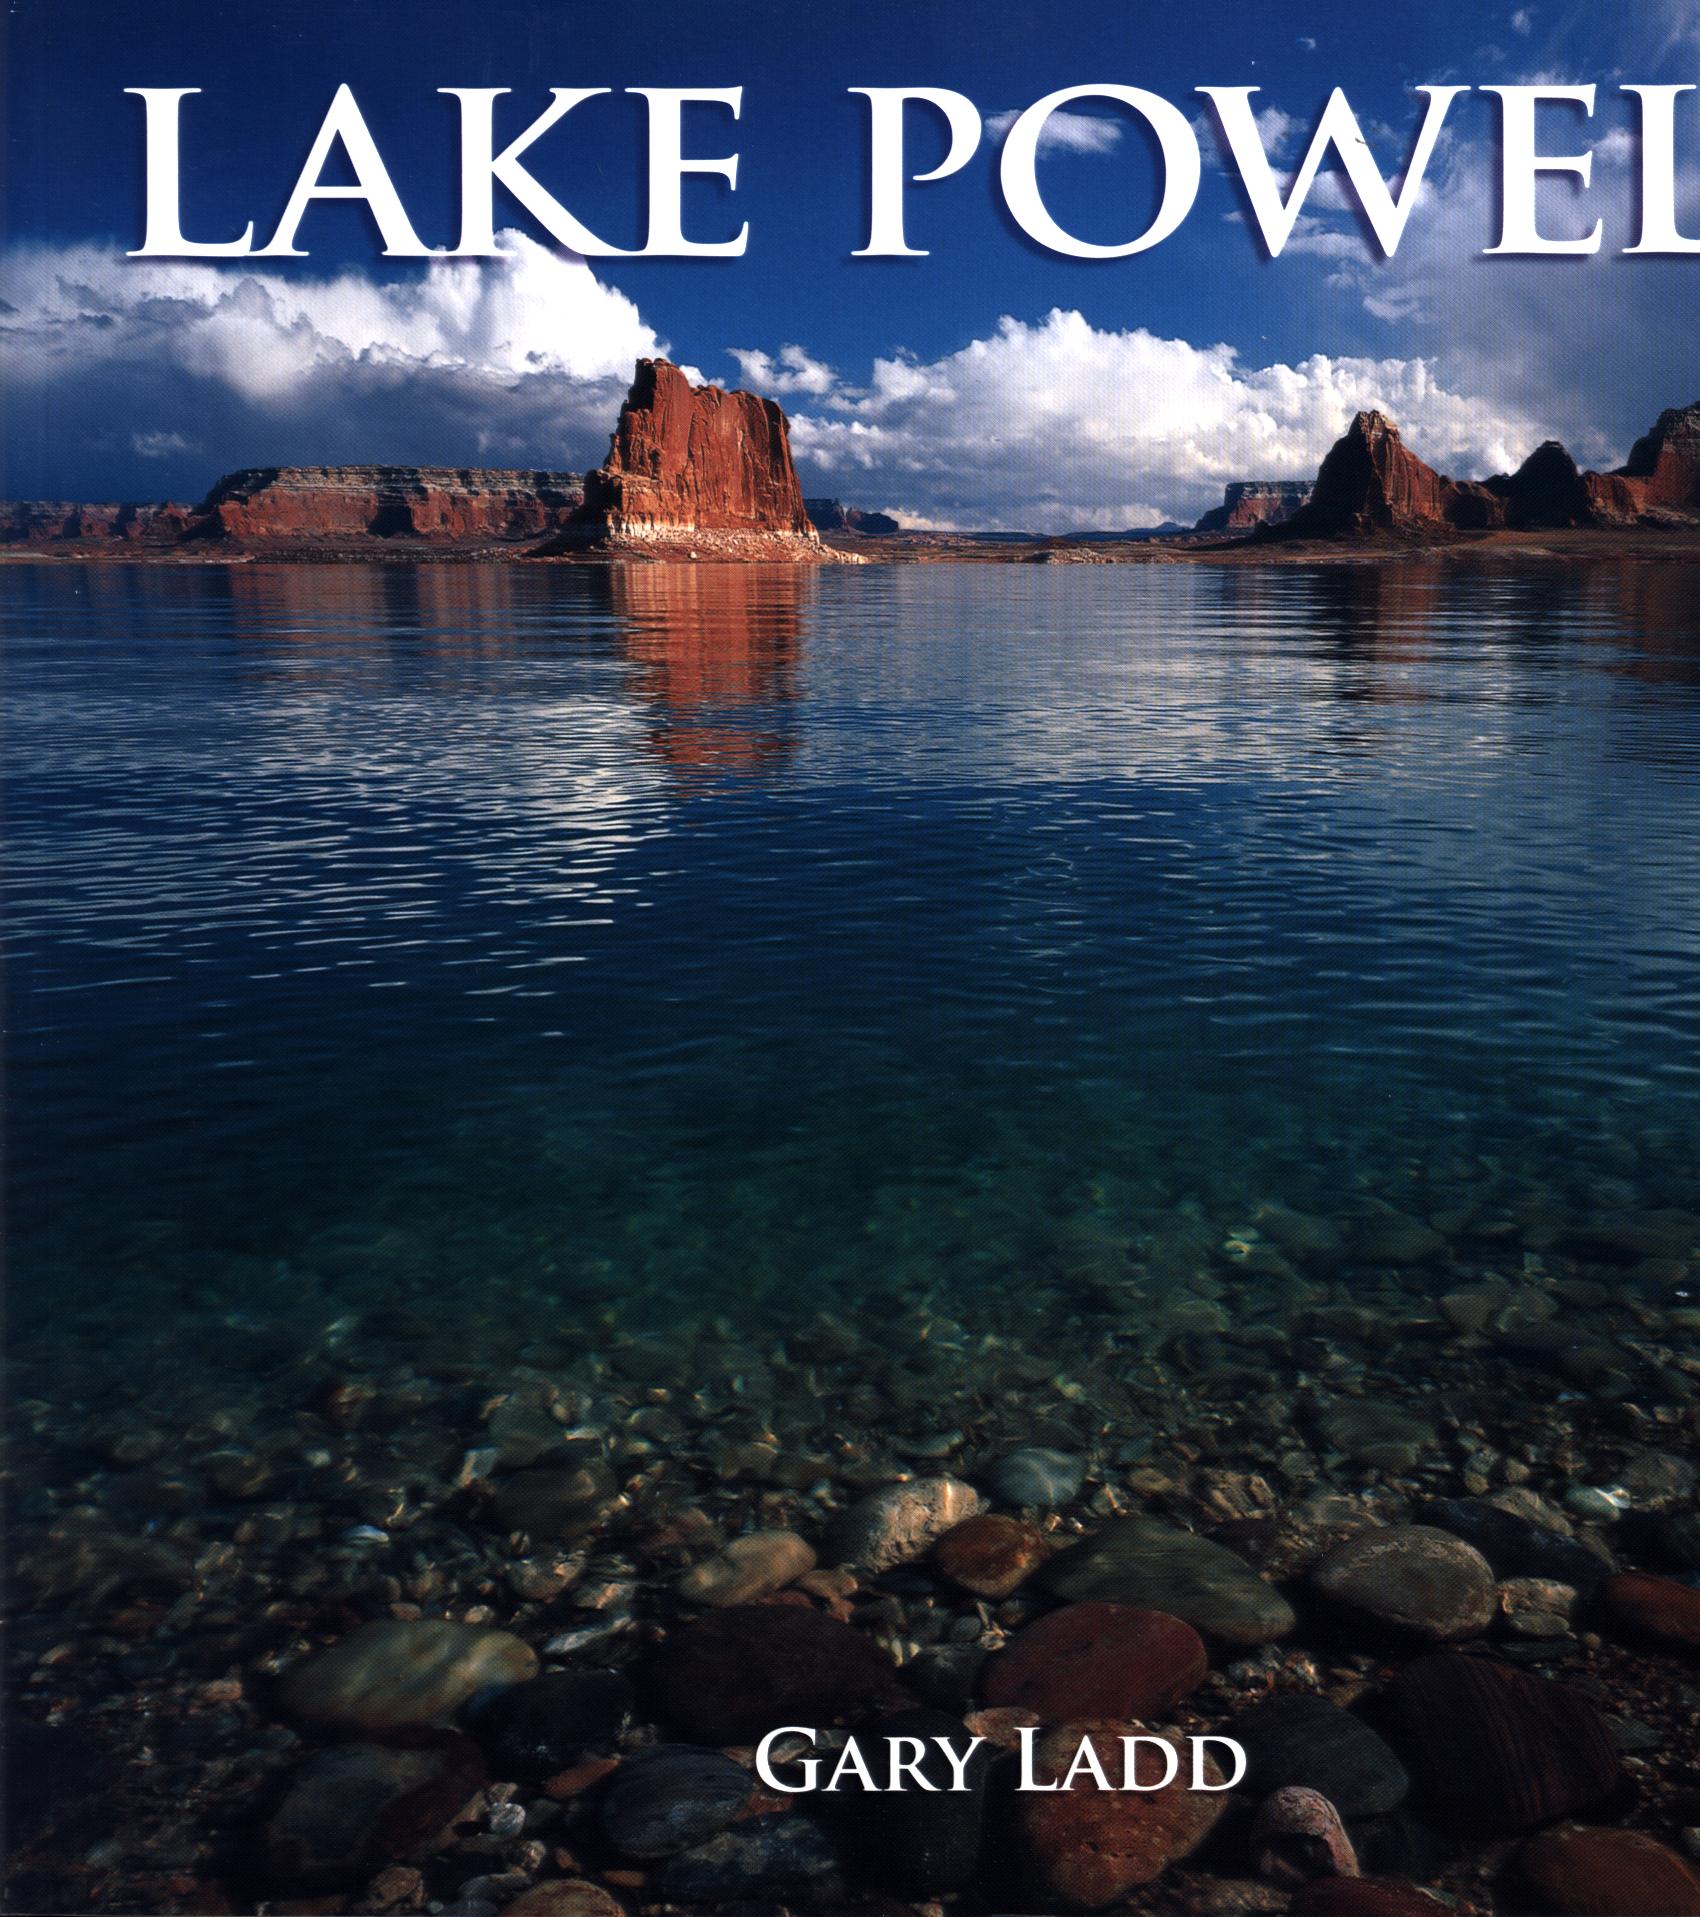 LAKE POWELL: a photographic essay of Glen Canyon National Recreation Area (UT). 